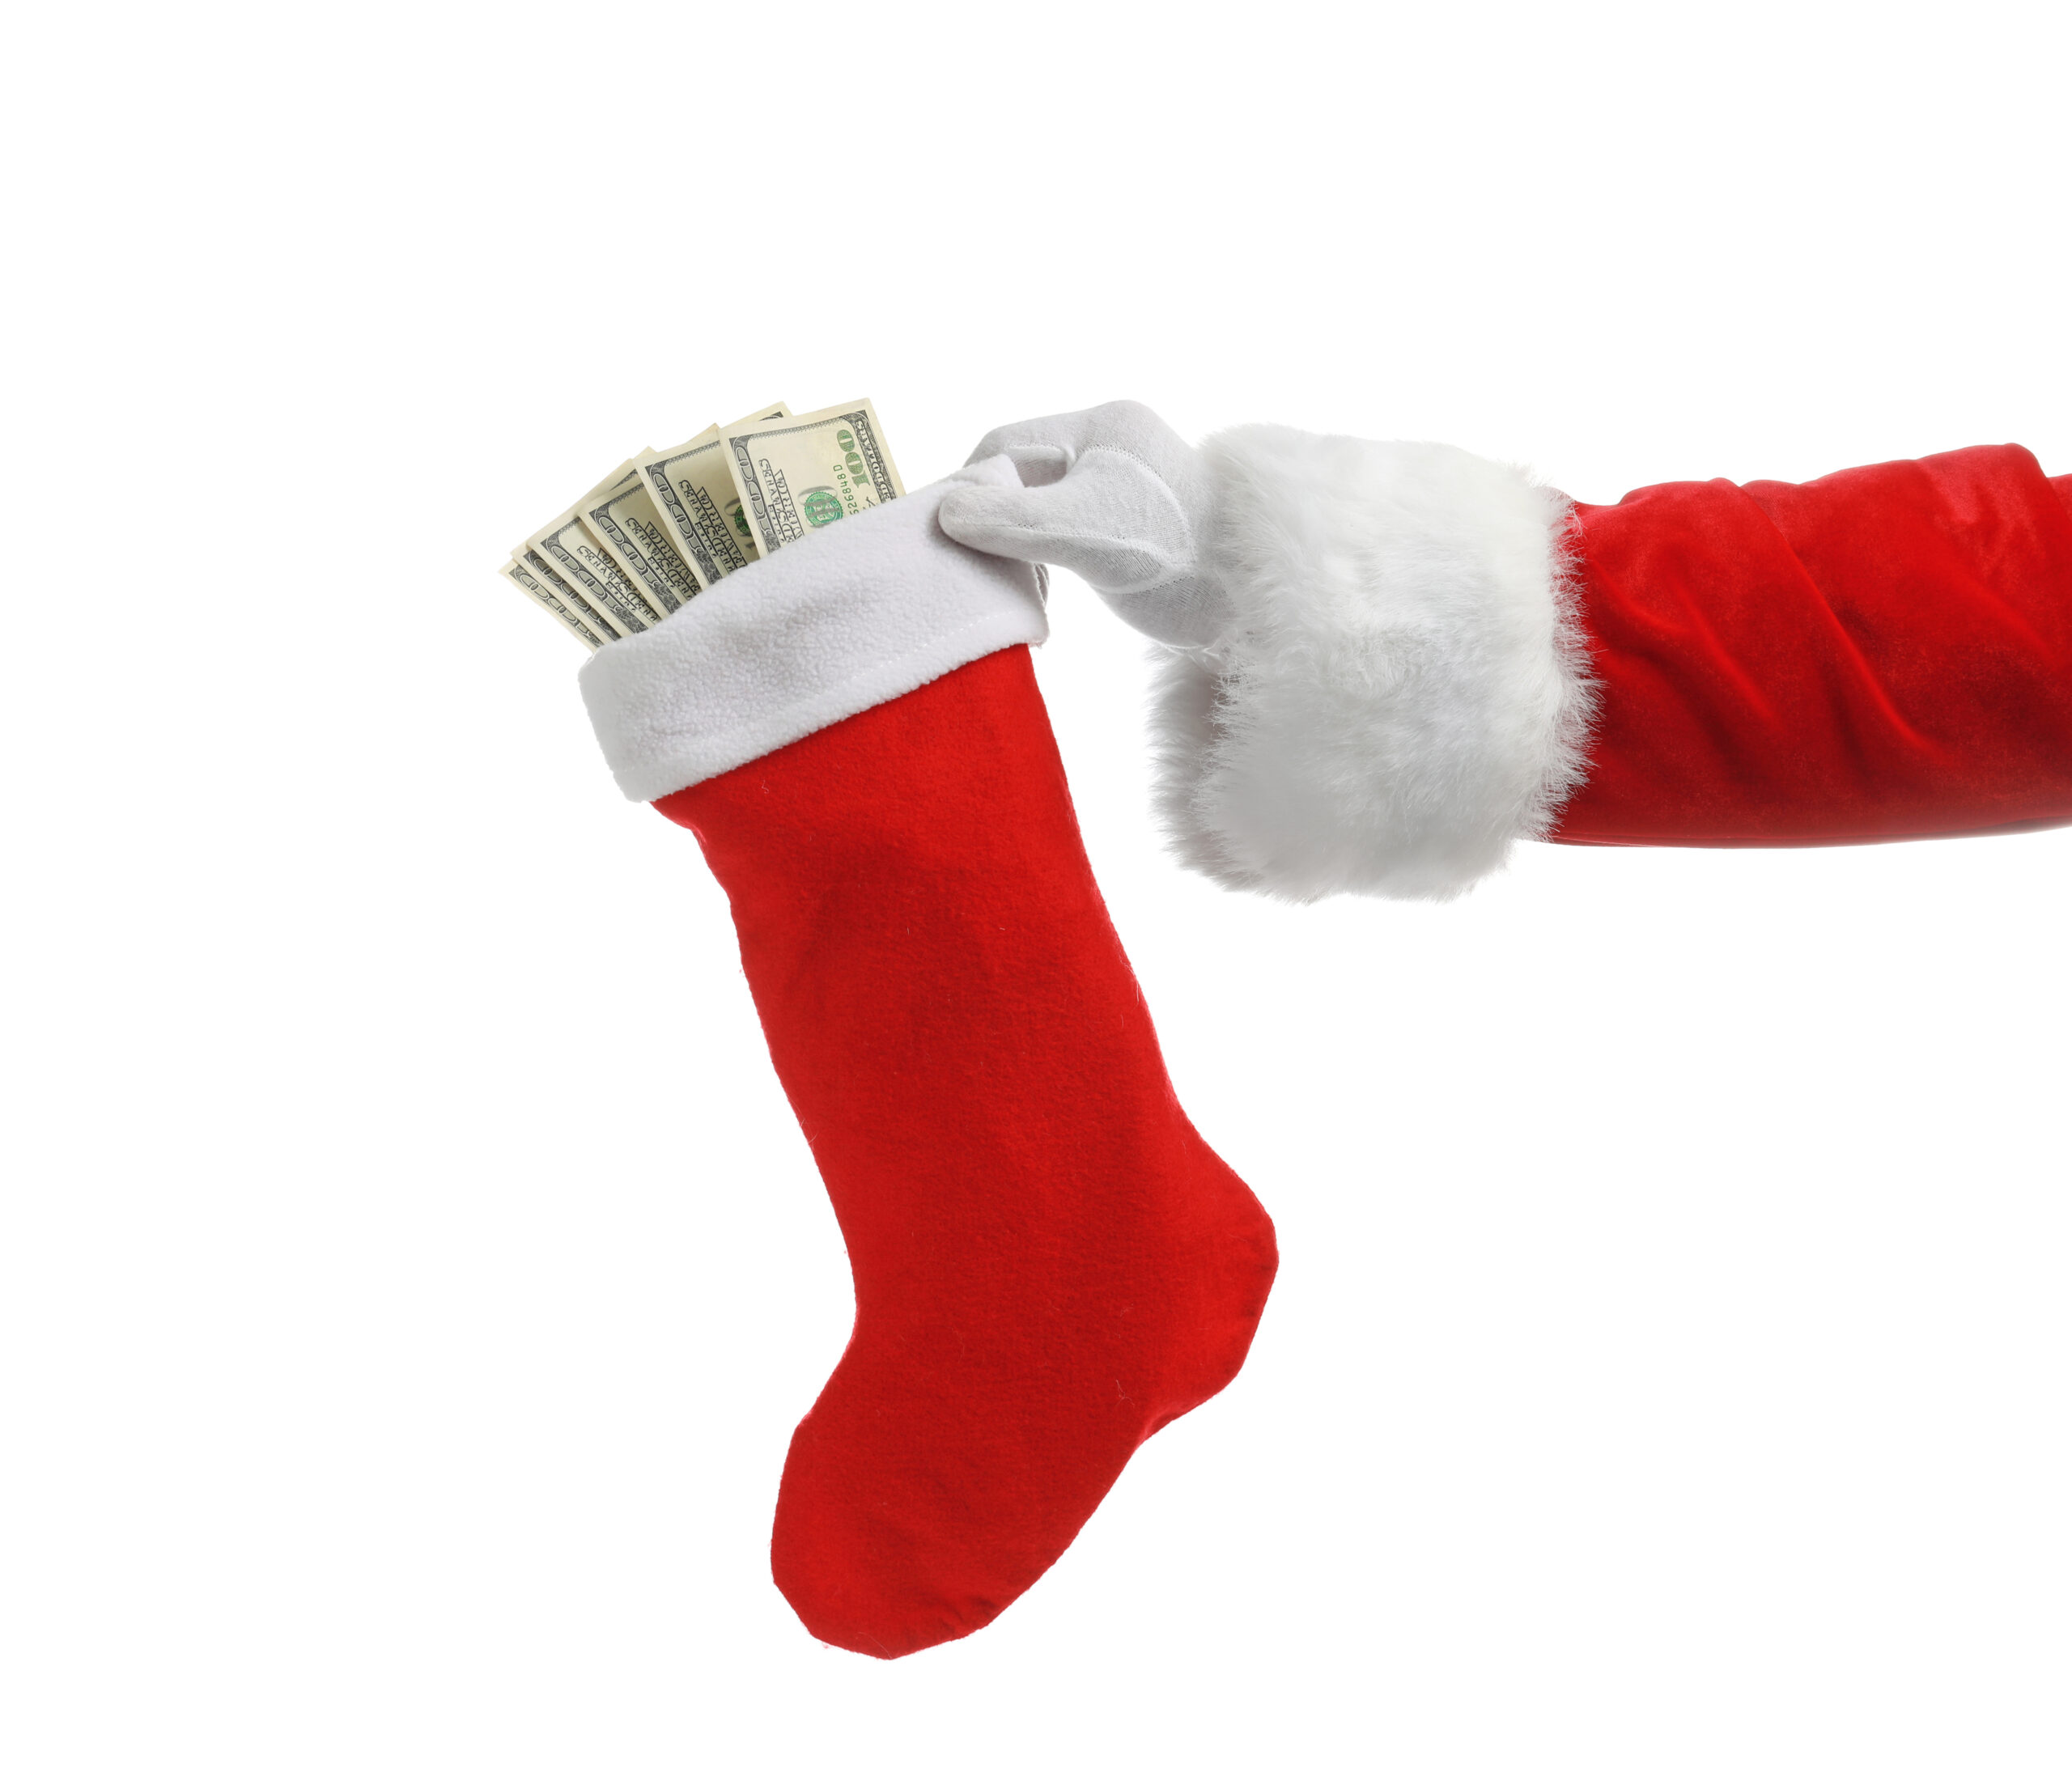 Start Saving Now: A Stress-Free Approach to Christmas Budgeting